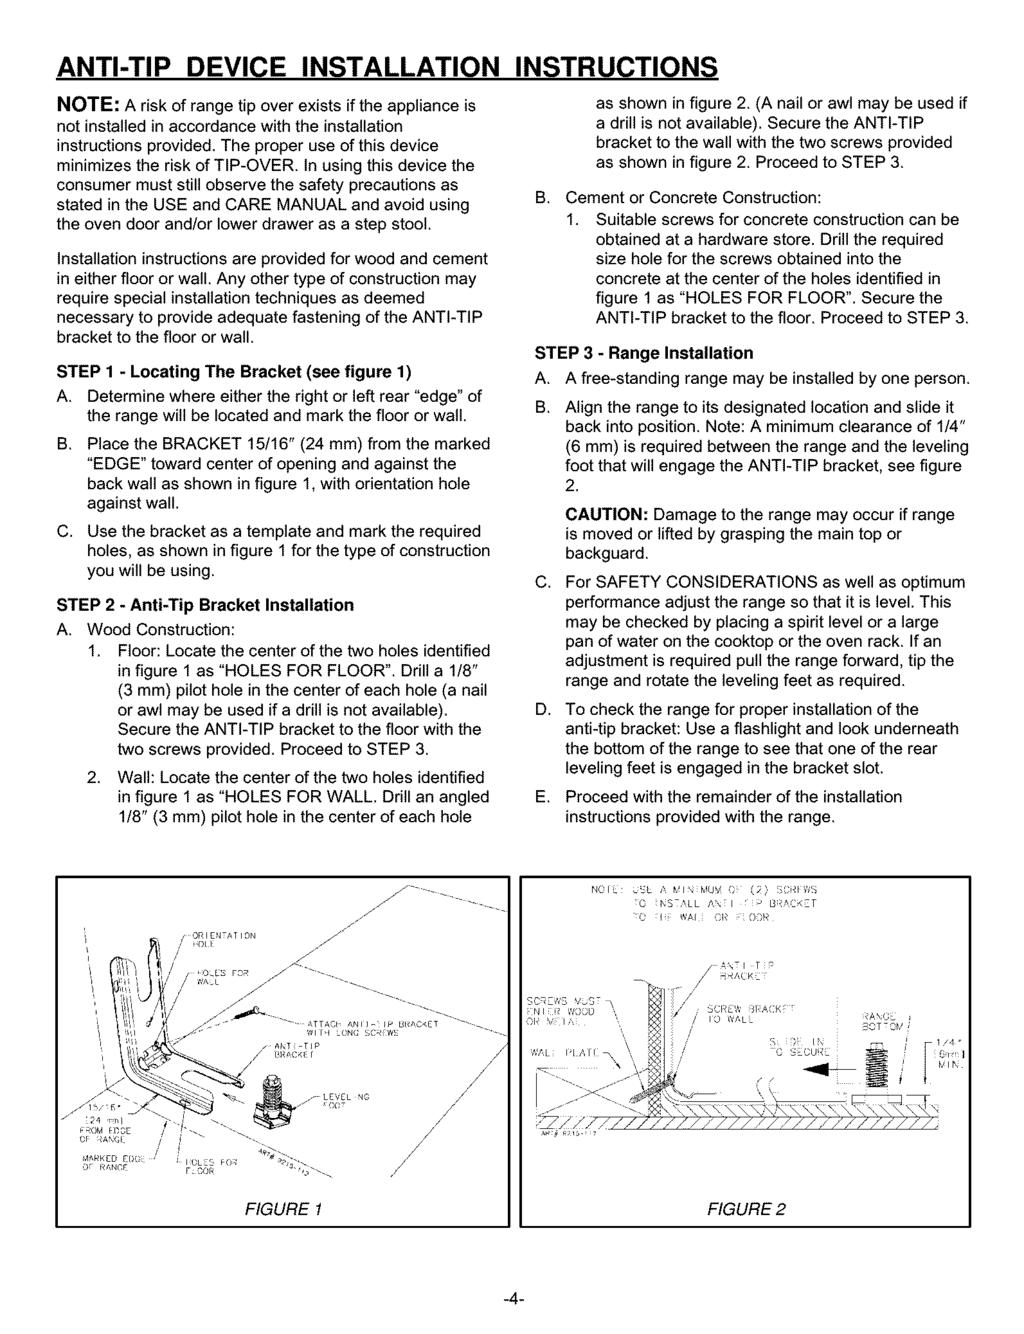 ANTI-TIP DEVICE INSTALLATION INSTRUCTIONS NOTE: A risk of range tip over exists if the appliance is not installed in accordance with the installation instructions provided.